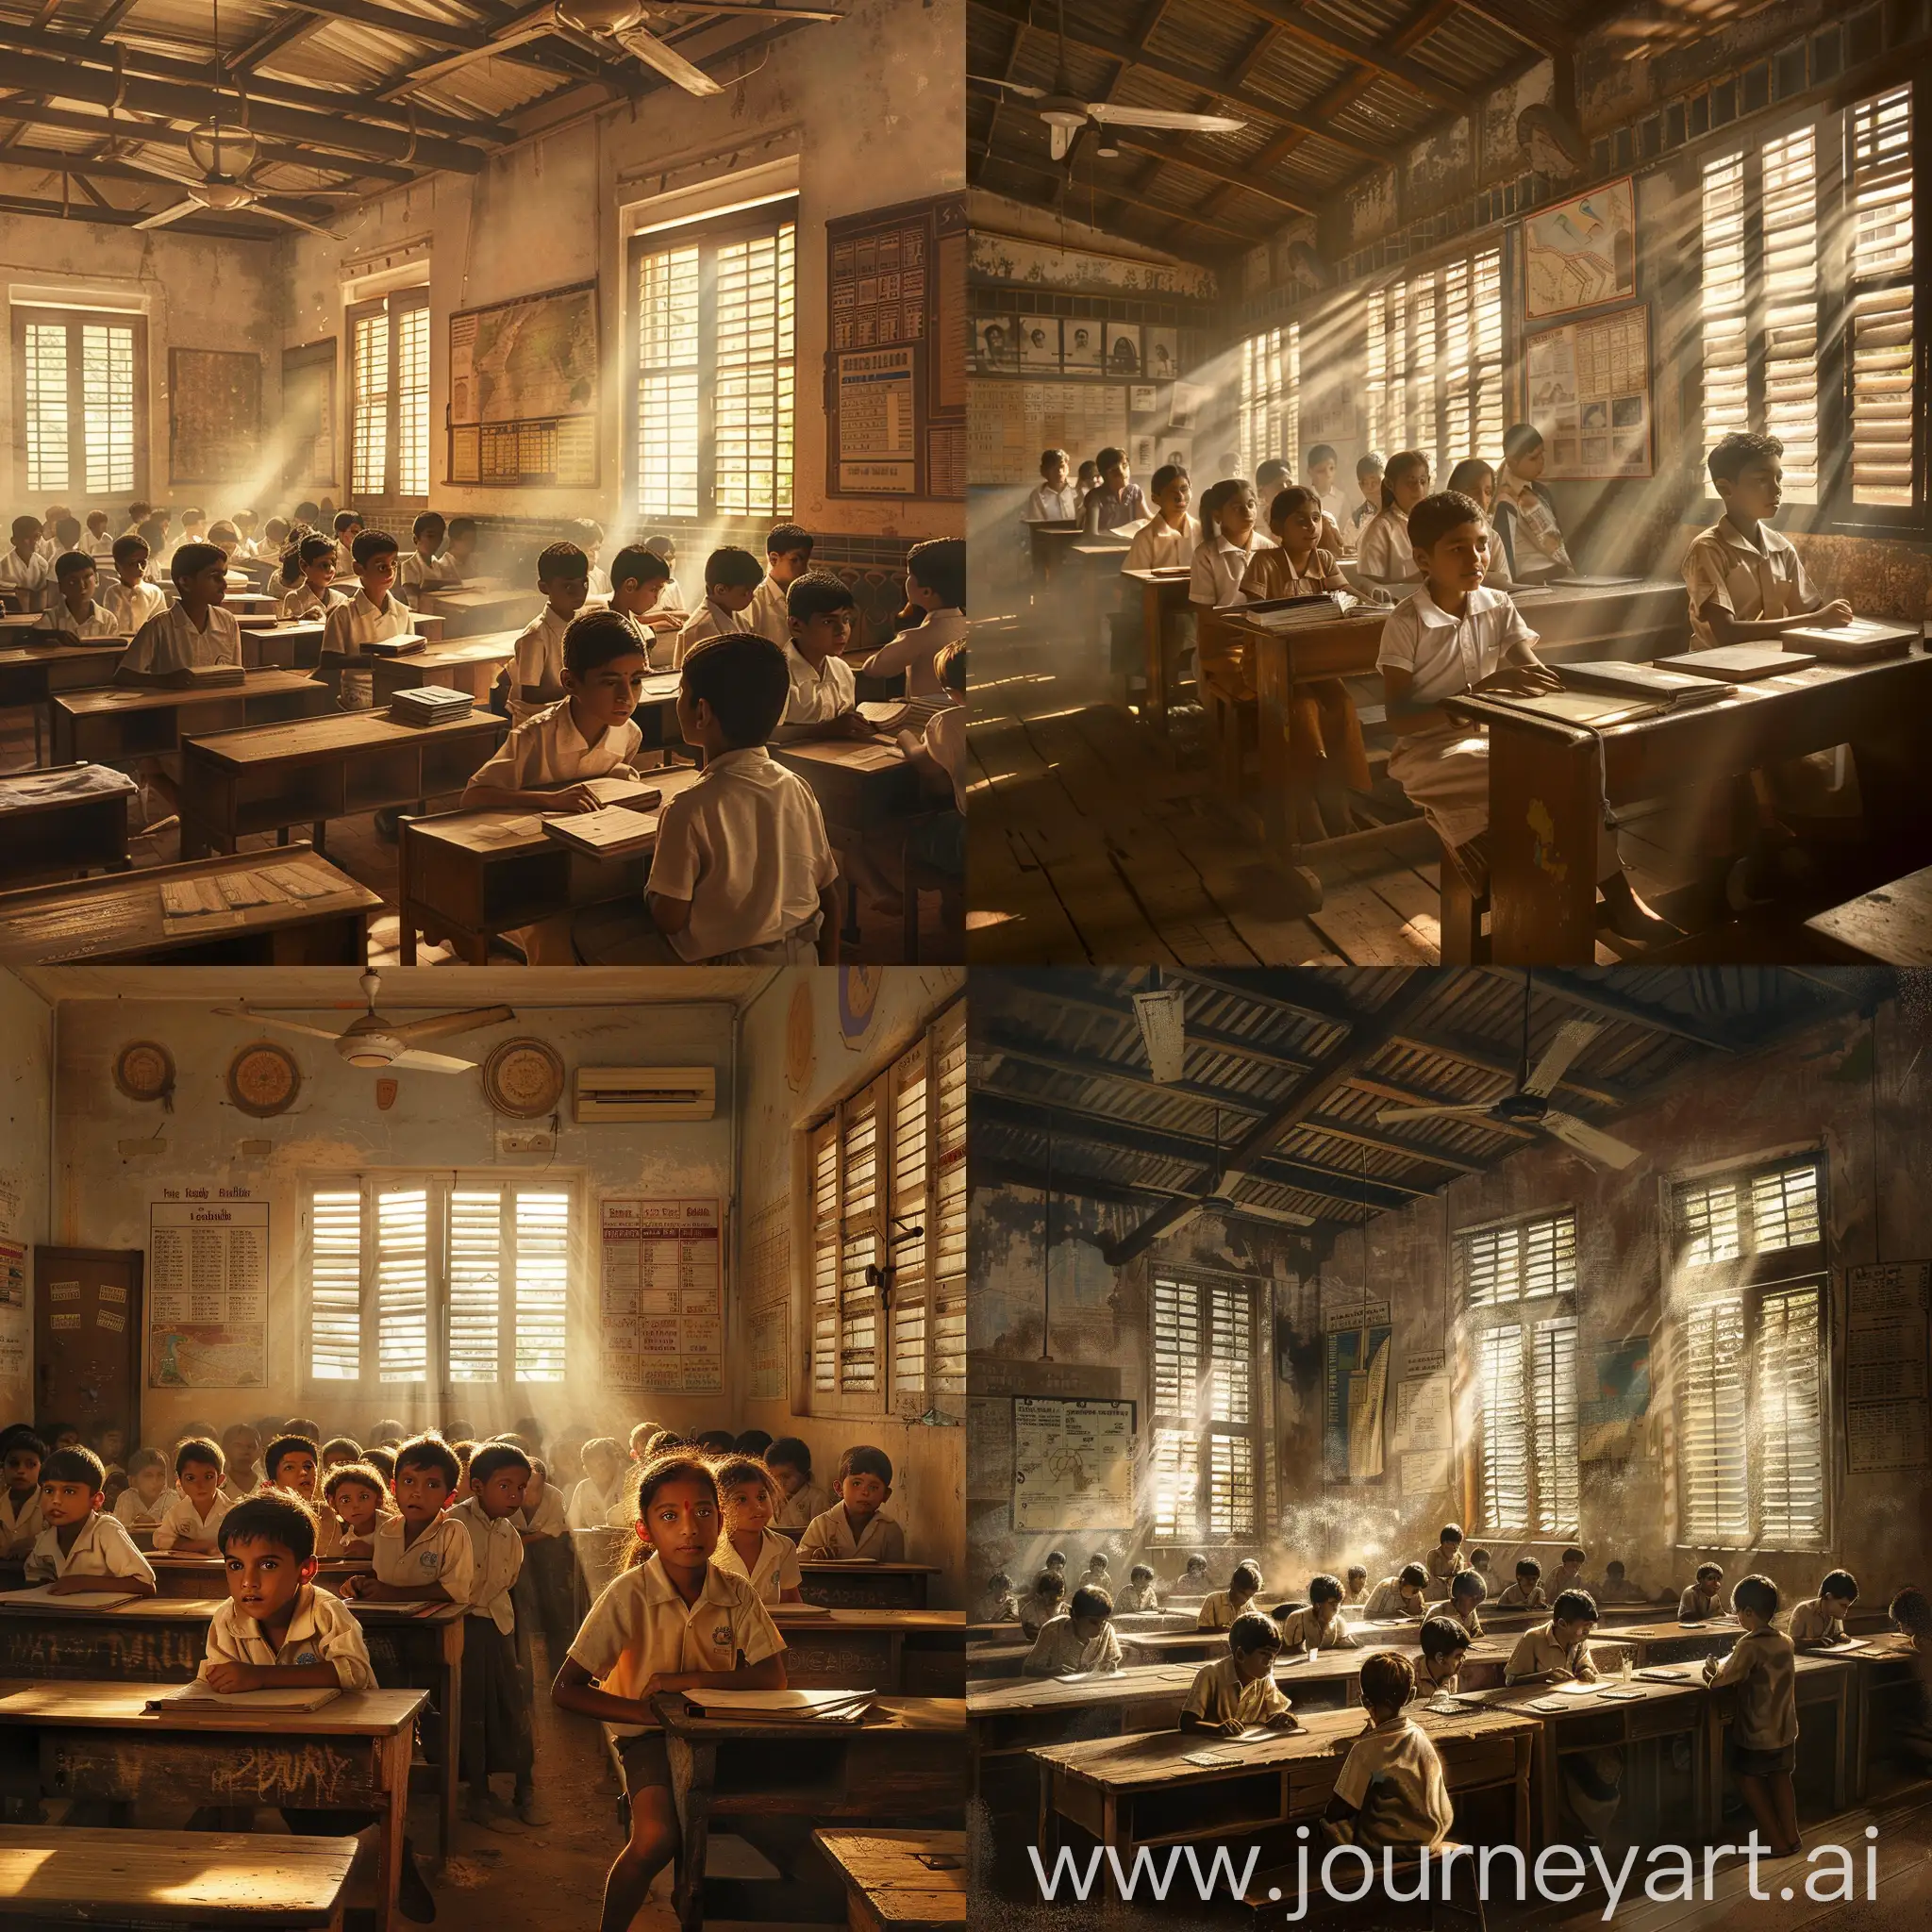 Capture the essence of a bygone era in a vintage Kerala school classroom teeming with students. Transport viewers to a time when wooden desks held weathered textbooks, and chalk dust danced in the air. Envision the walls adorned with educational charts and maps, showcasing a nostalgic blend of tradition and learning. Render the subtle play of sunlight filtering through louvered windows onto eager faces, hinting at a simpler yet vibrant academic setting. Evoke the spirit of communal education and cultural richness, inviting observers to immerse themselves in the charm of a timeless Kerala classroom frozen in the sepia tones of yesteryears.